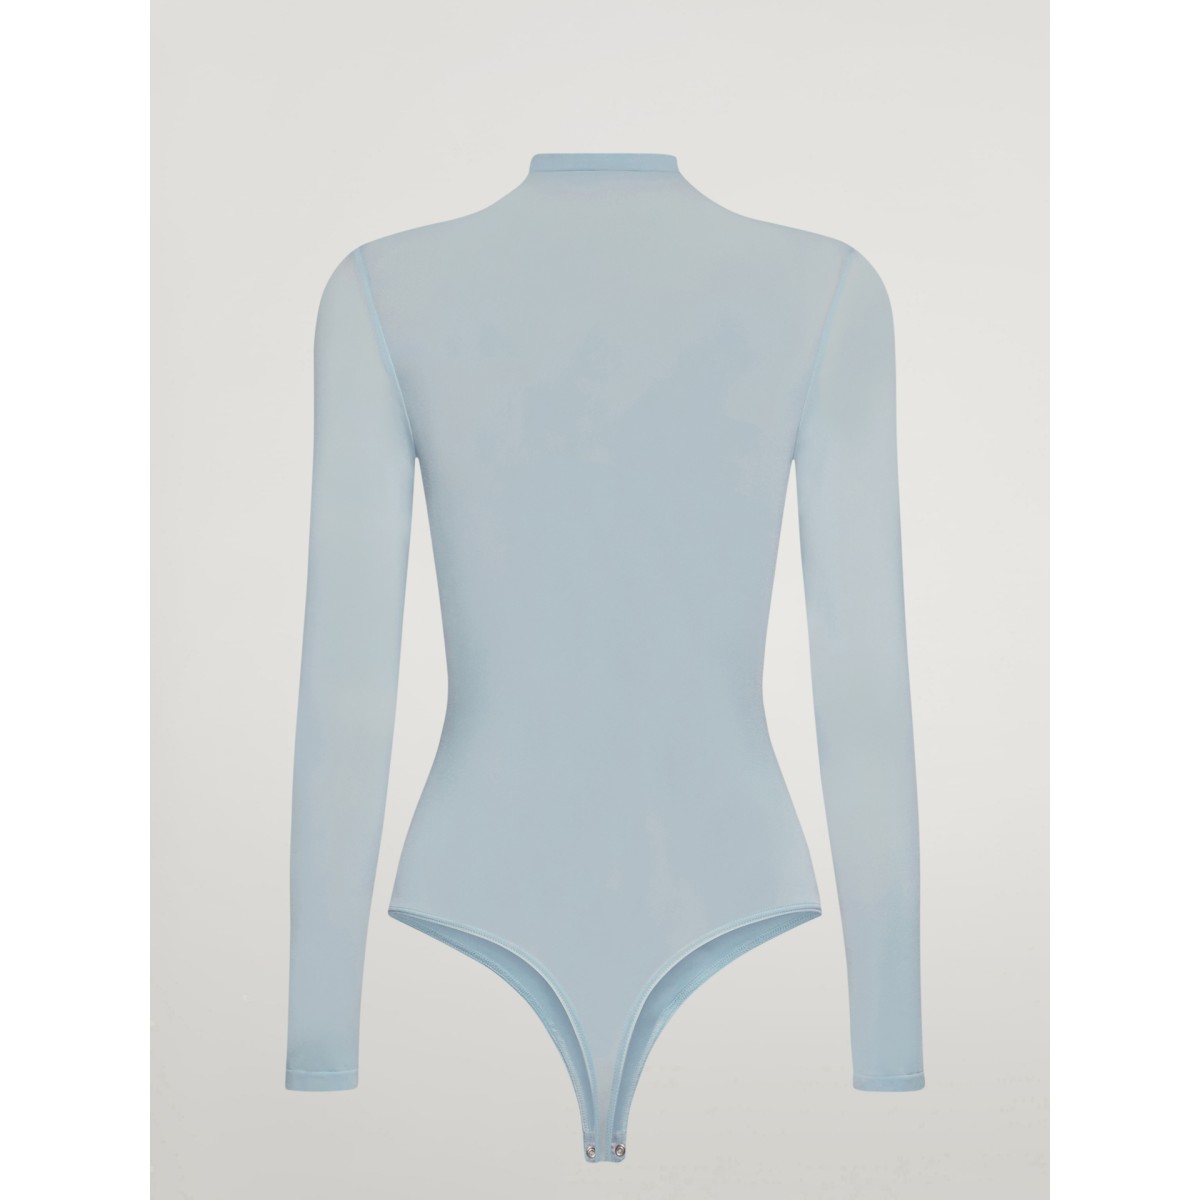 Wolford Wolford Buenos Aires Turtleneck Bodysuit, Farfetch.com